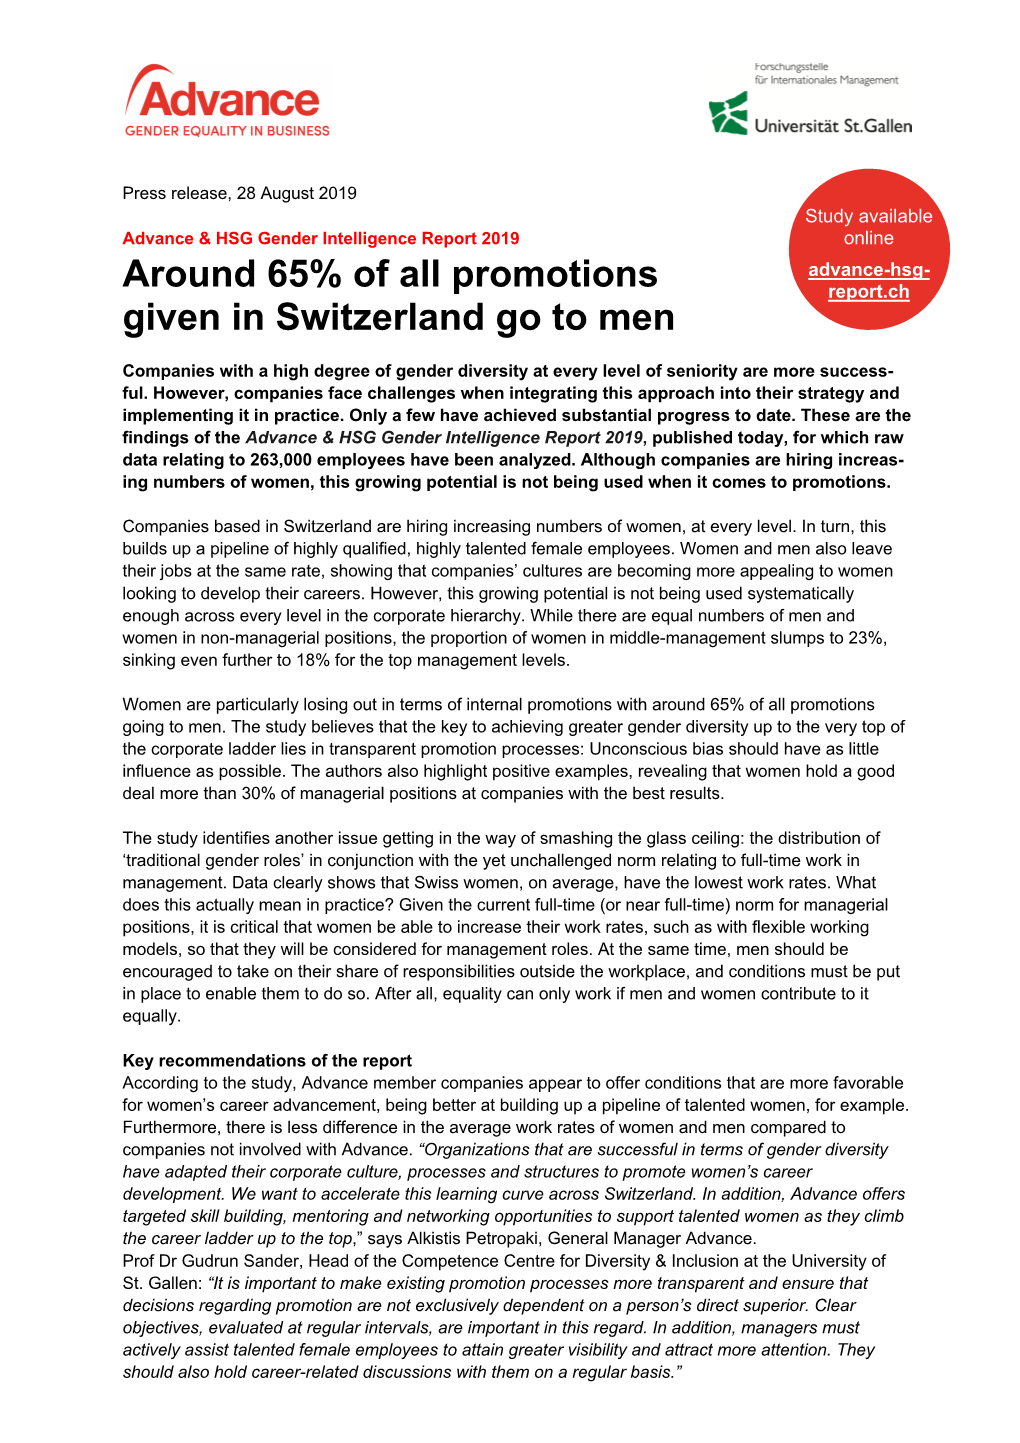 Around 65% of All Promotions Given in Switzerland Go To